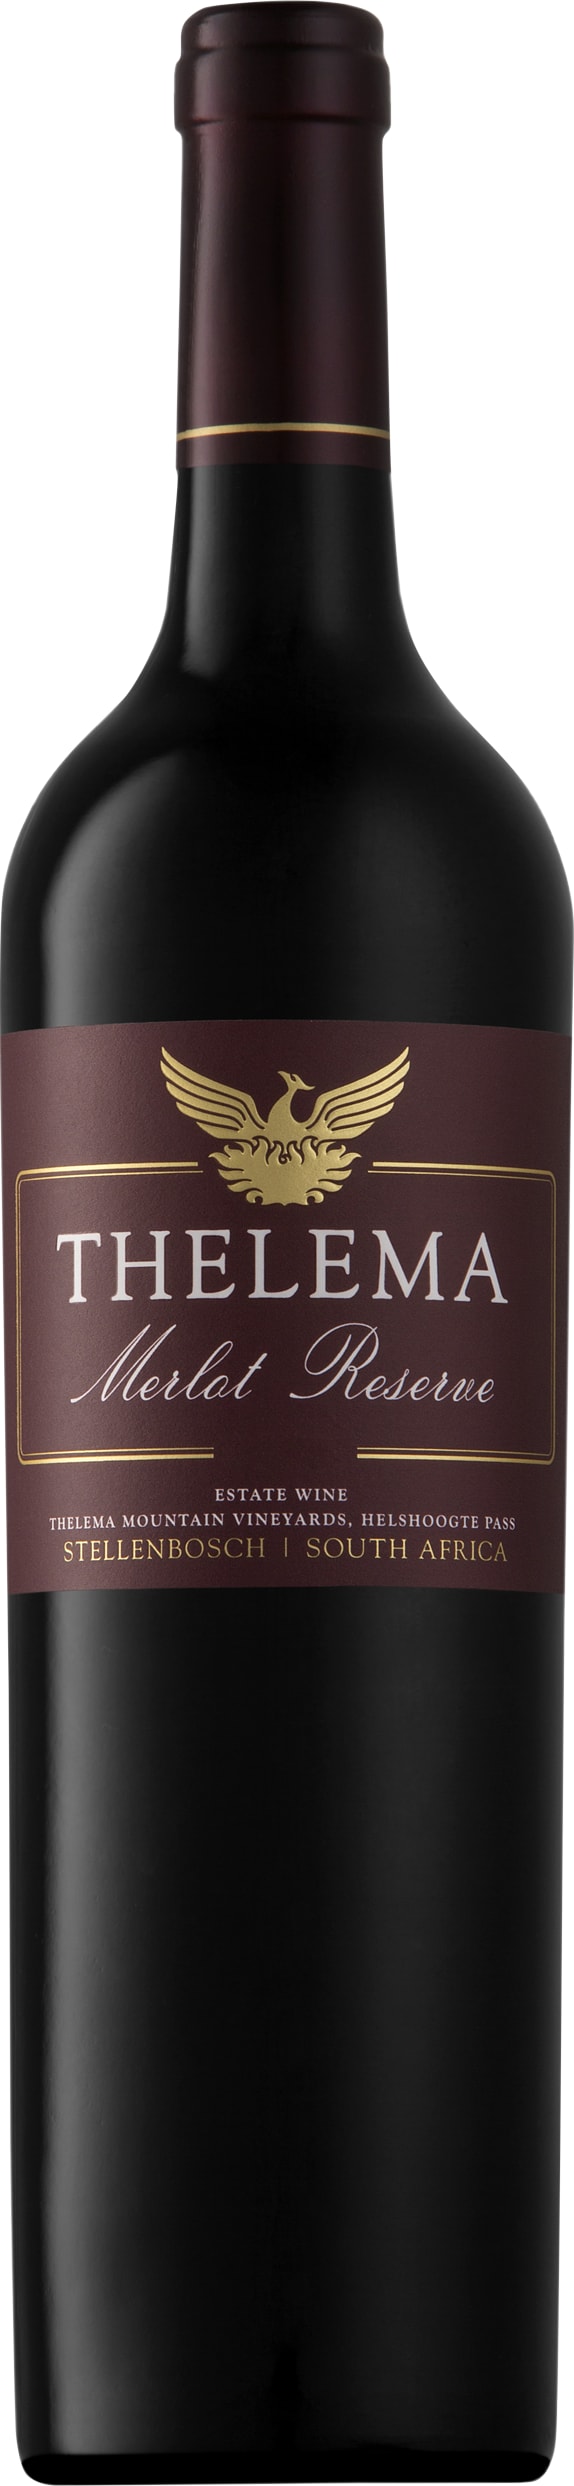 Thelema Mountain Vineyards Merlot Reserve 2020 75cl - Buy Thelema Mountain Vineyards Wines from GREAT WINES DIRECT wine shop